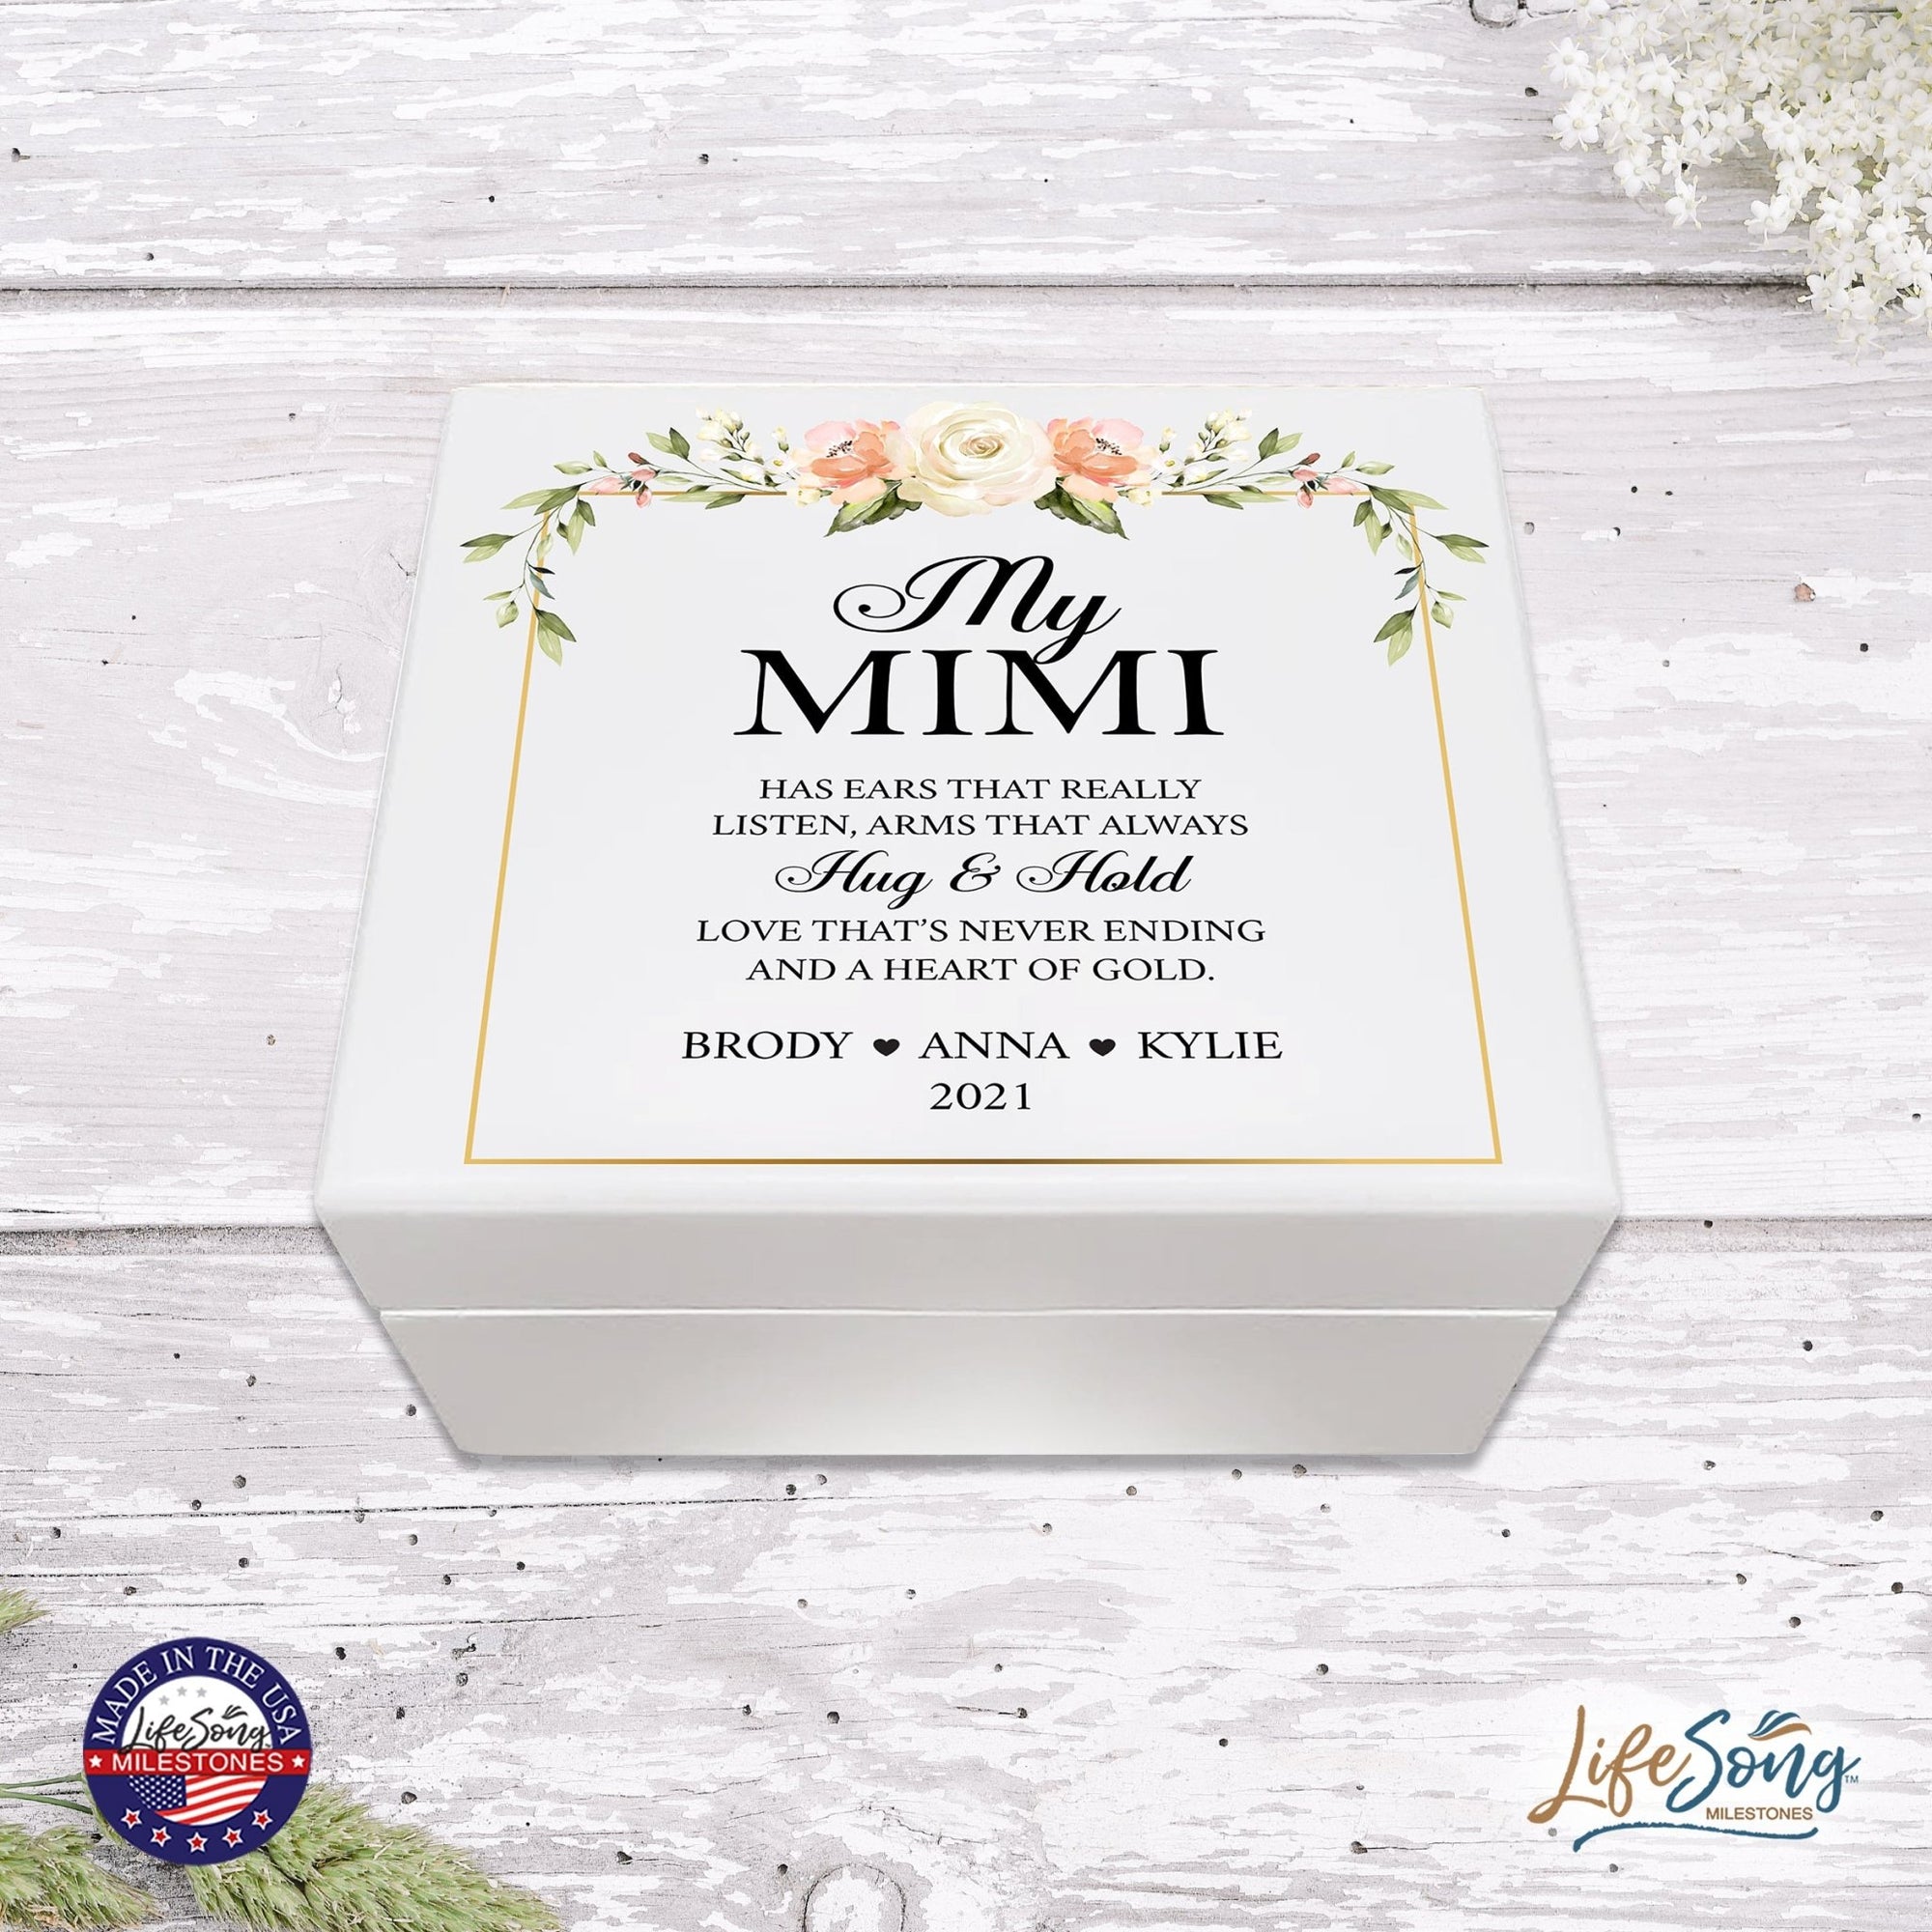 Personalized Mimi’s White Keepsake Box 6x5.5in with Inspirational verse - Hug and Hold - LifeSong Milestones